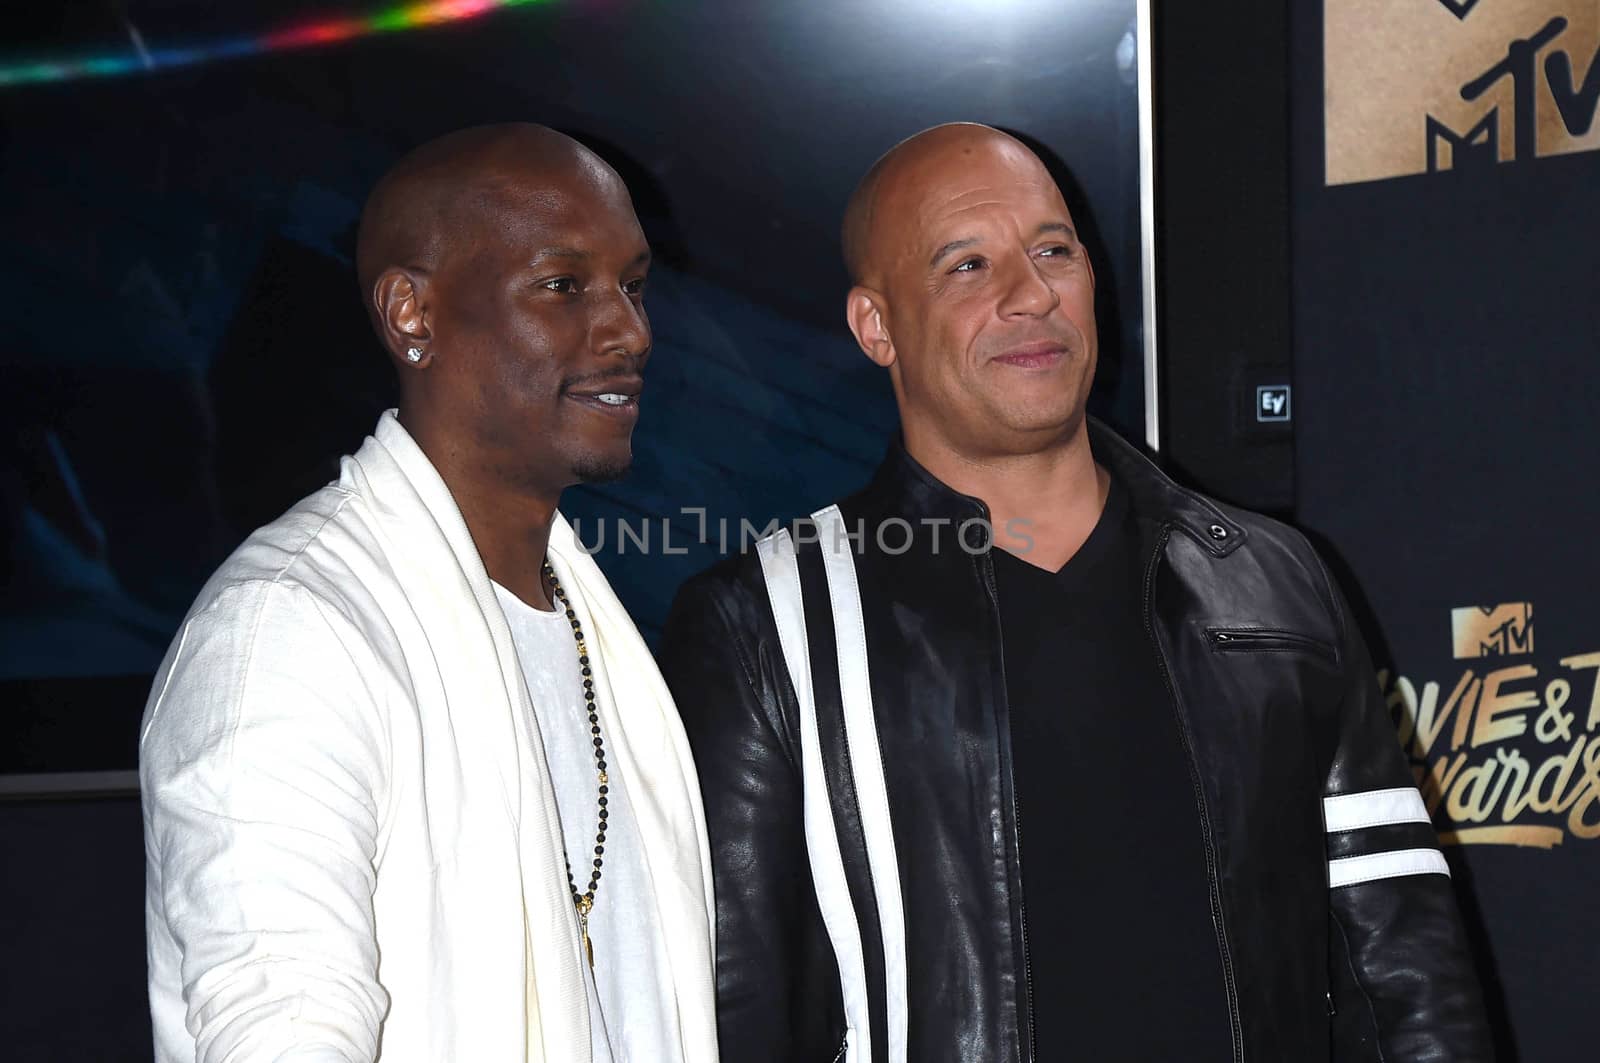 Tyrese Gibson, Vin Diesel at the 2017 MTV Movie & TV Awards, Press Room, Shrine Auditorium, Los Angeles, CA 05-07-17/ImageCollect by ImageCollect